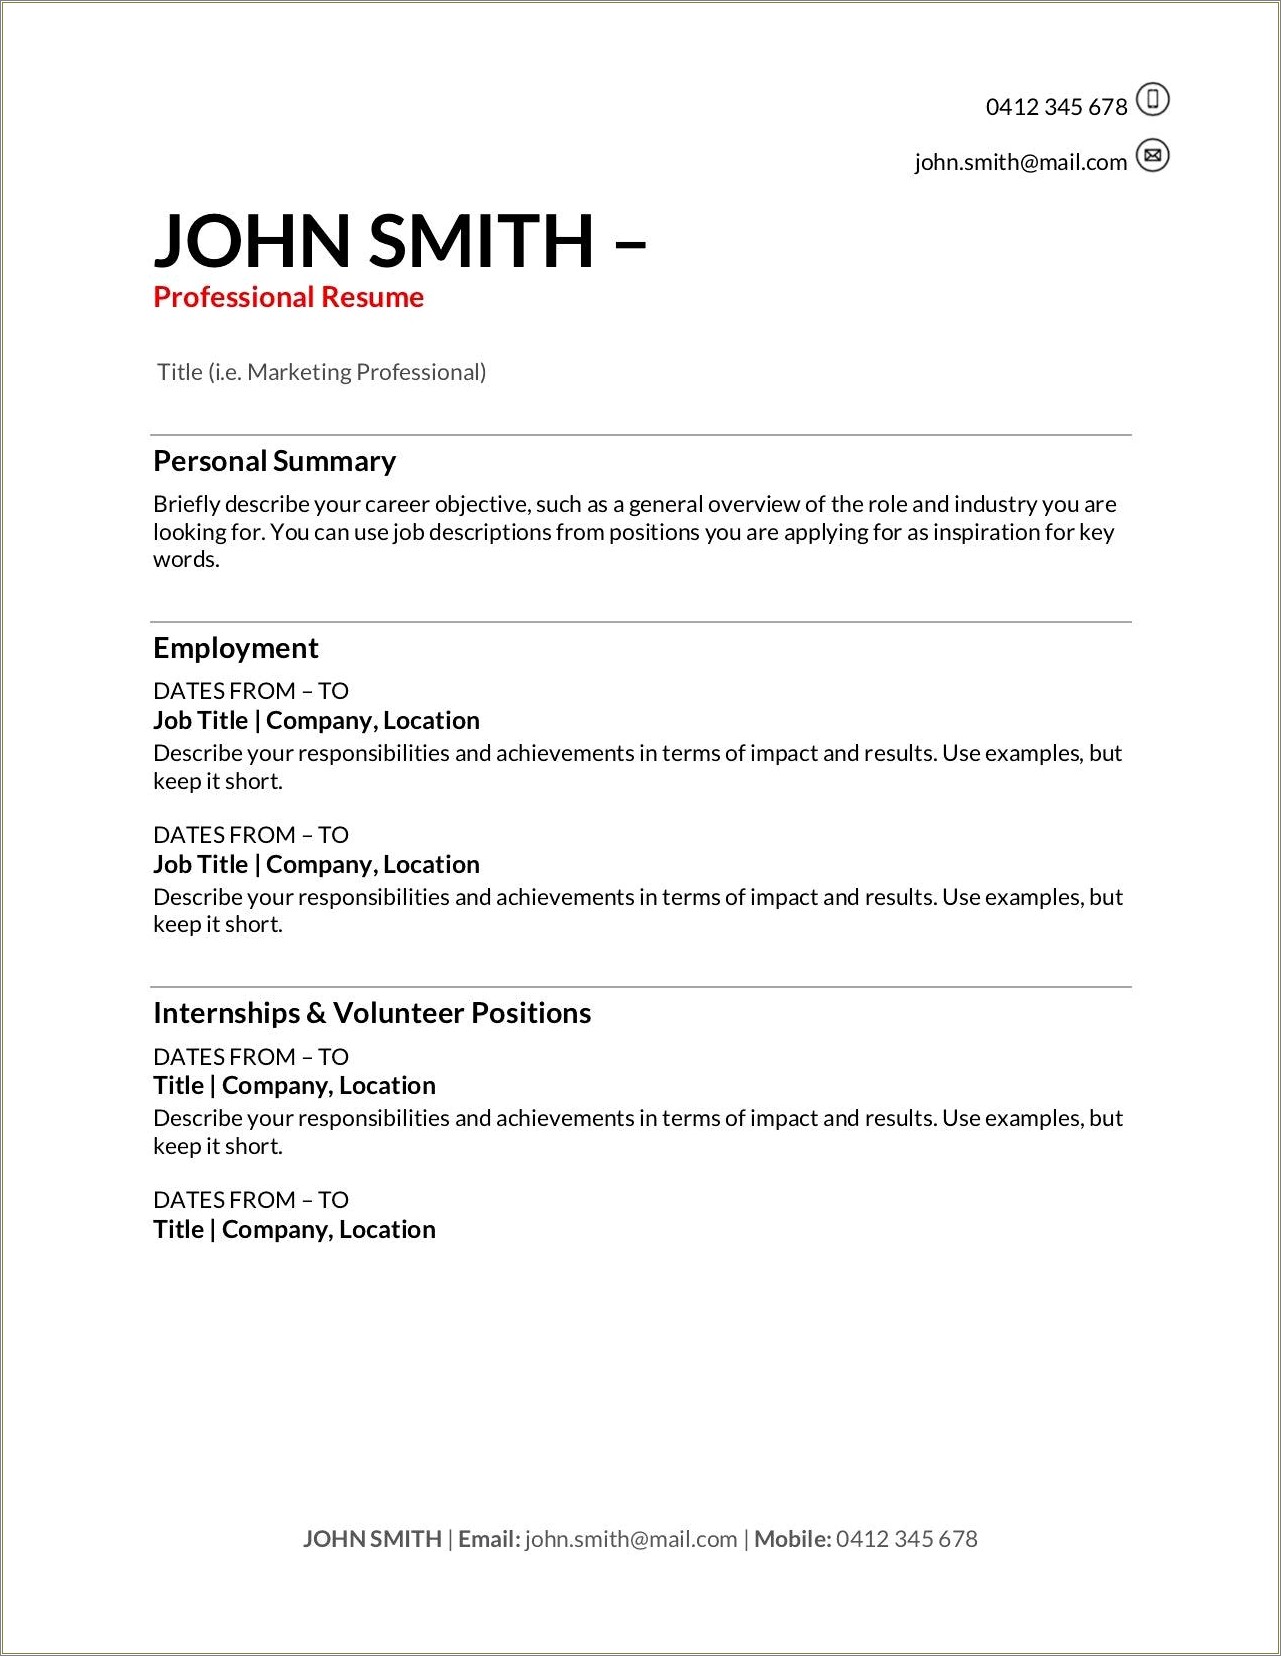 Resume For A Job Training Role Examples